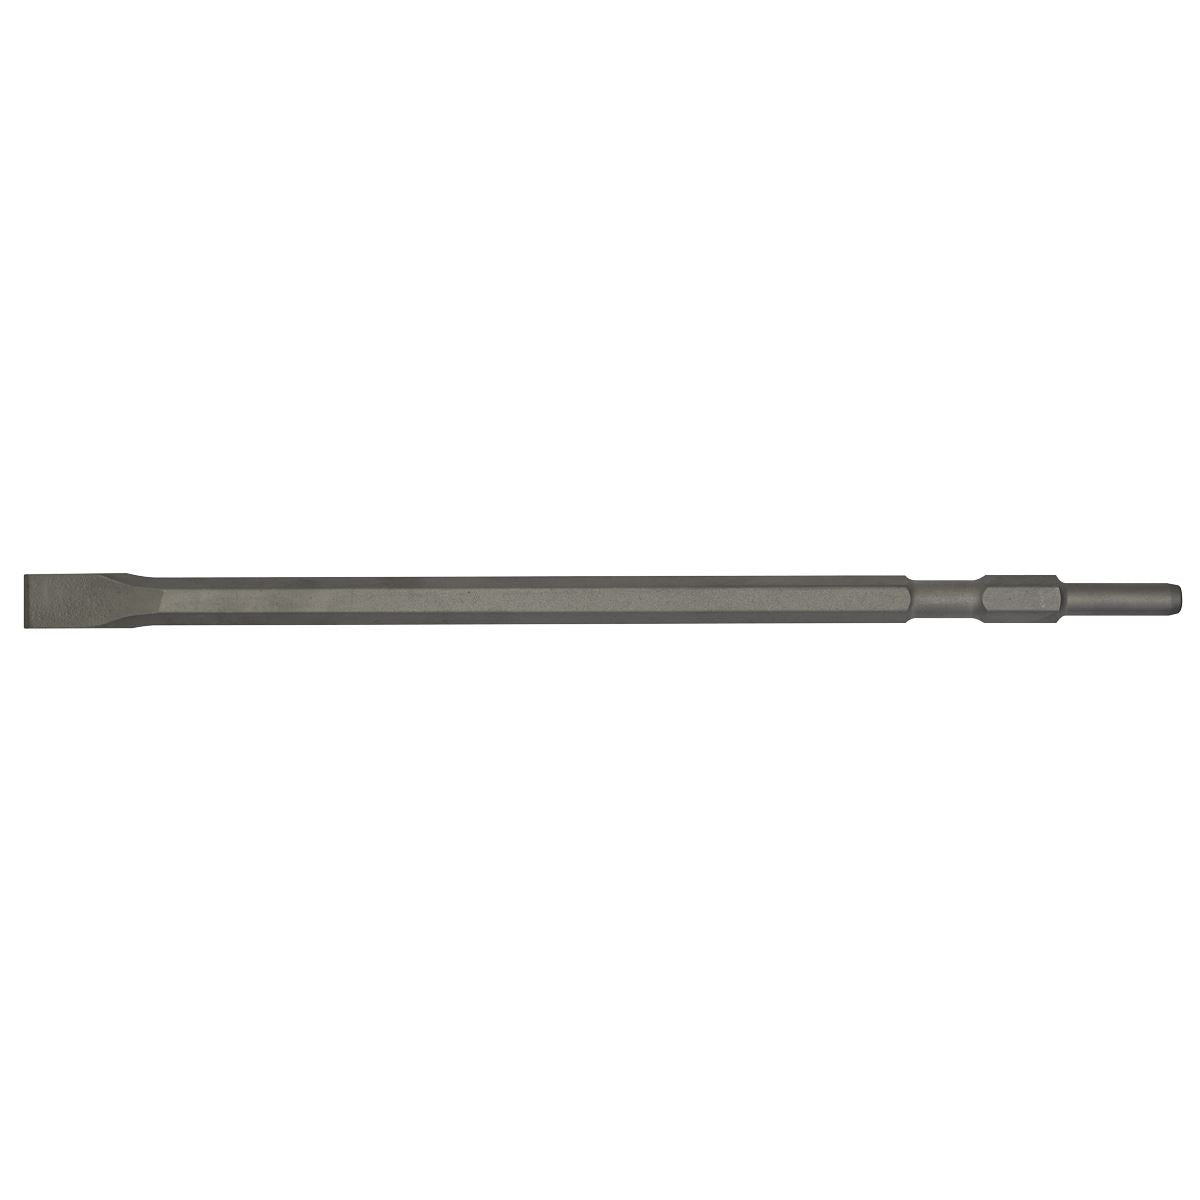 Worksafe by Sealey Chisel 20 x 450mm - Makita HM0810